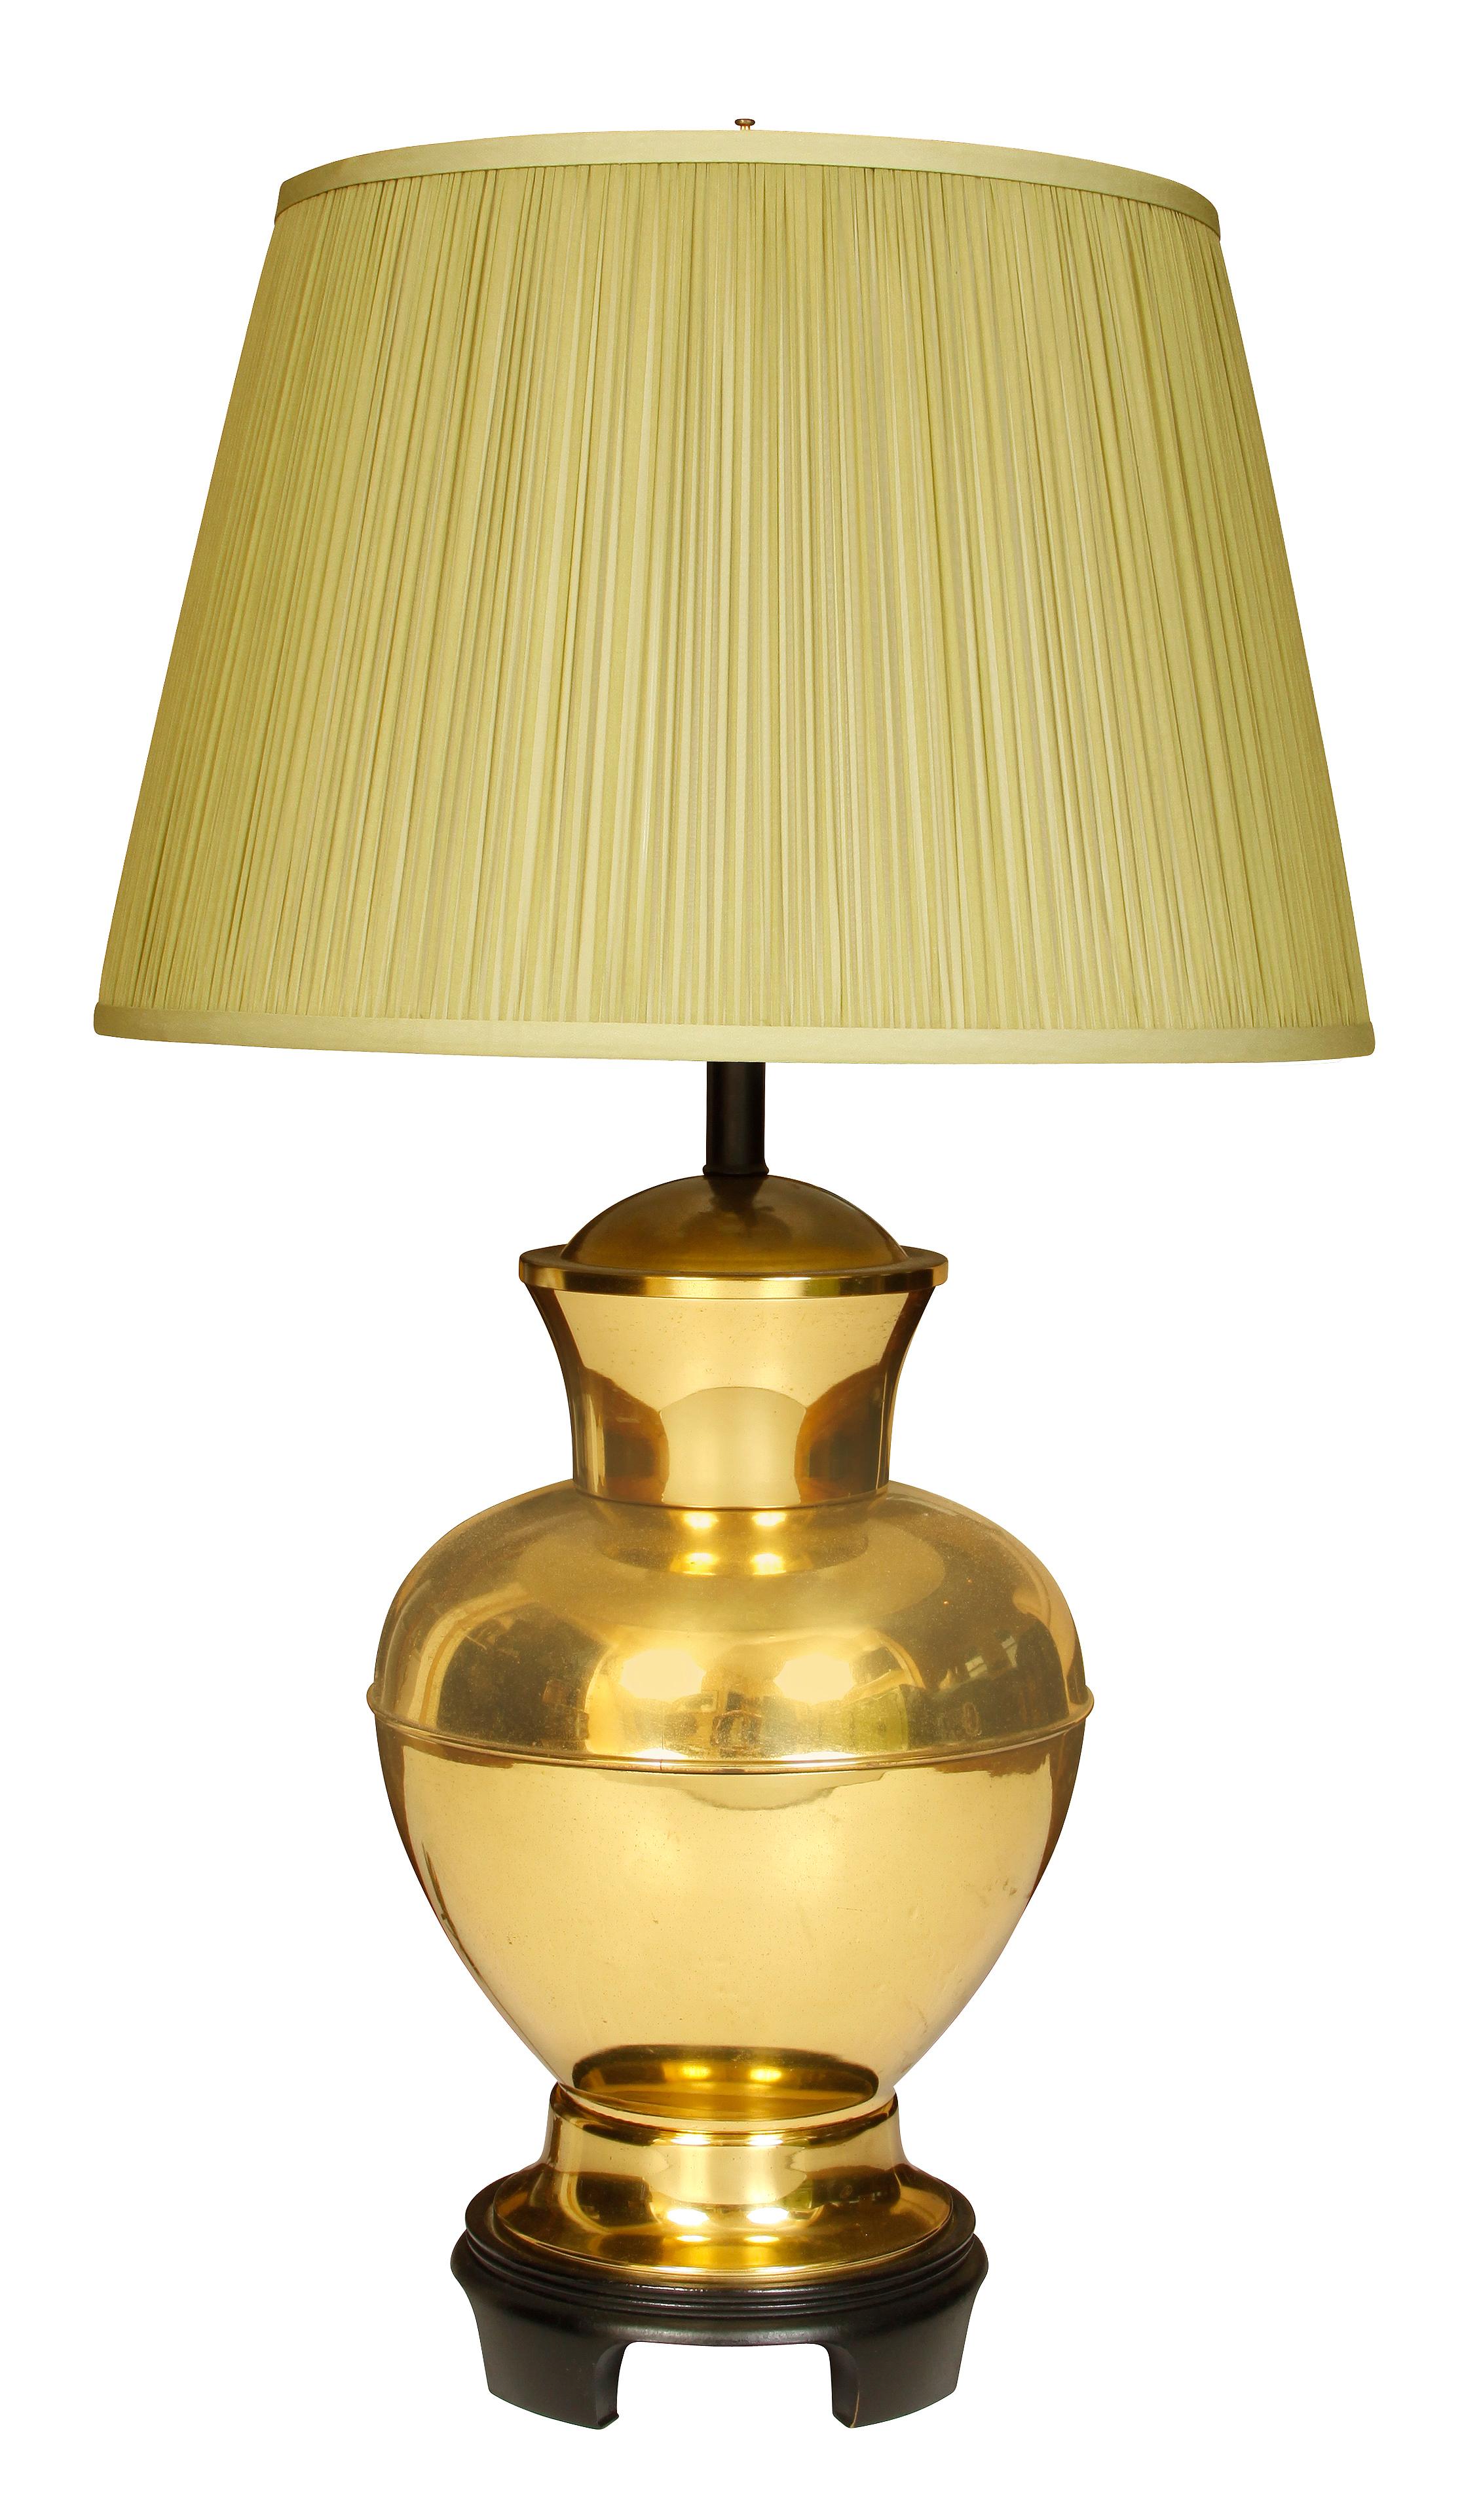 A pair of midcentury round brass lamps with silk shades.